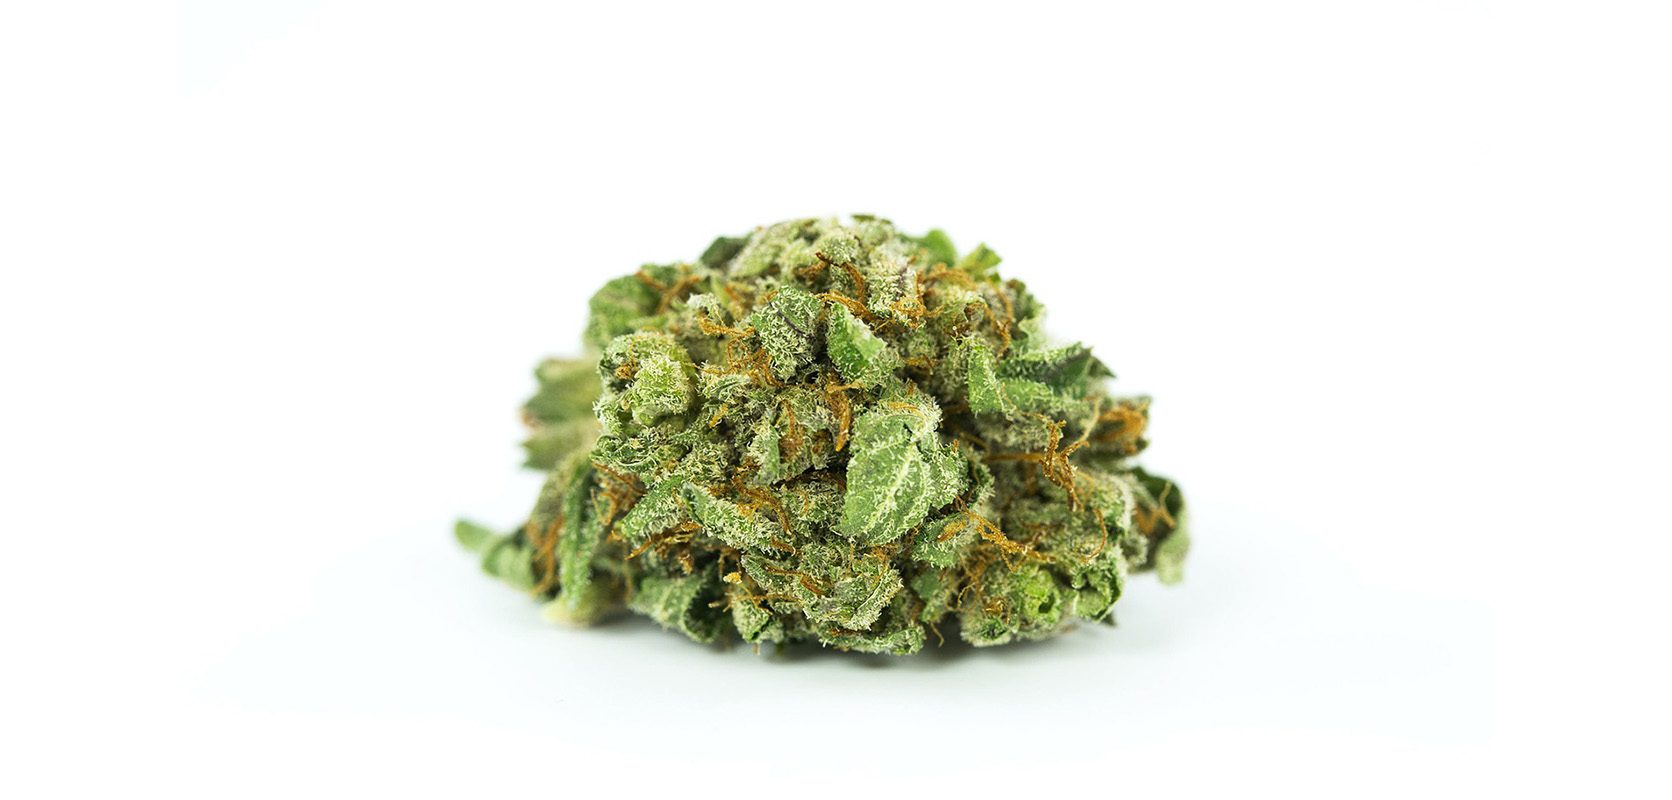 Powdered Donuts Strain budget buds from online dispensary Canada Low Price Bud. weed shop. budmail. buy weed online canada. gummys and vape pens.